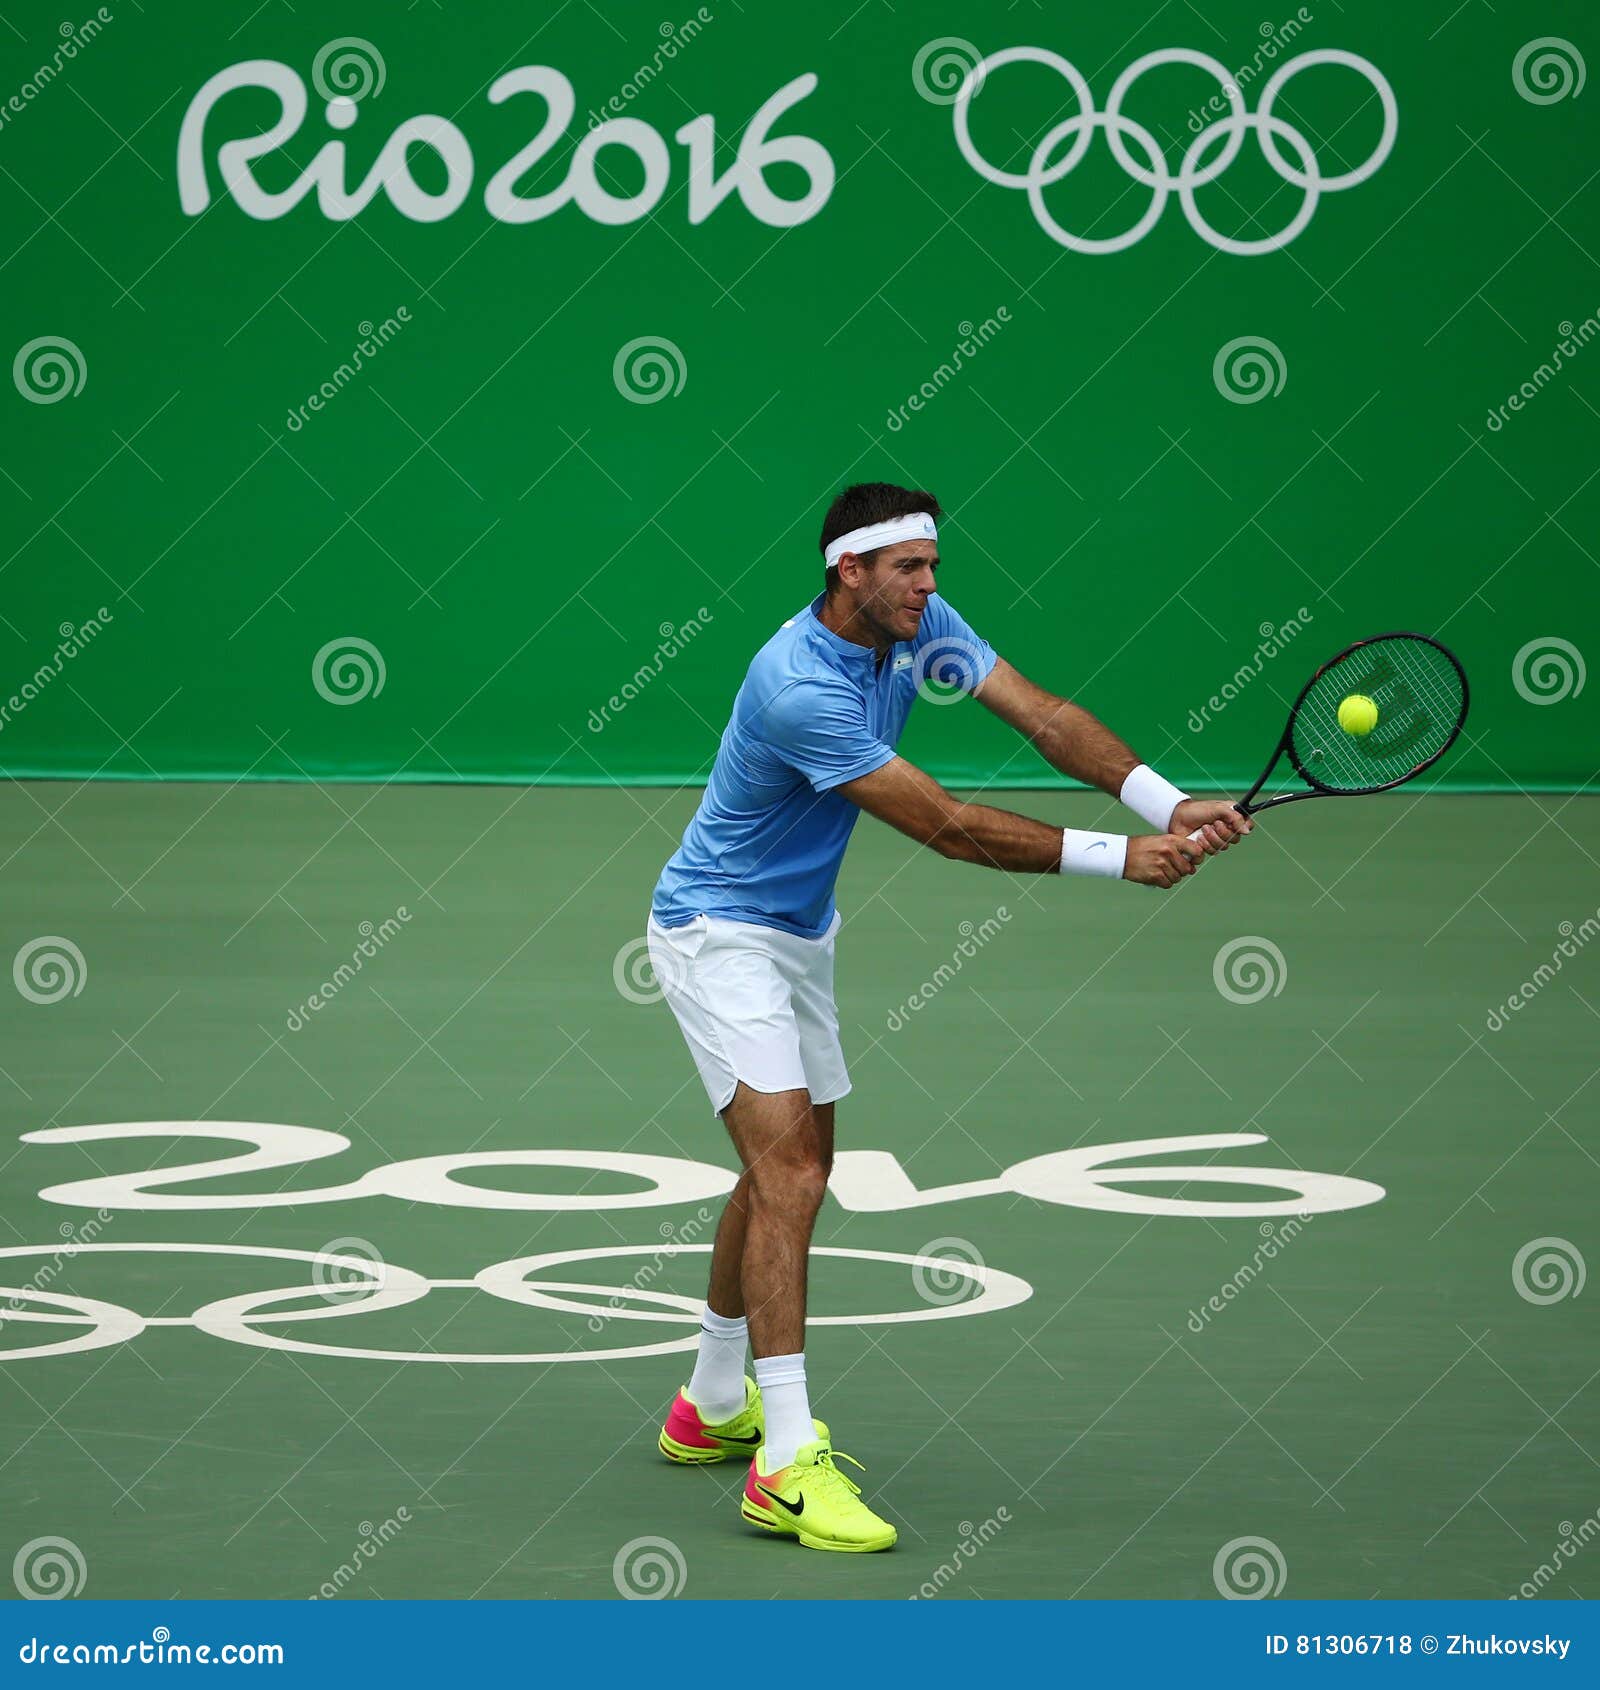 RIO DE JANEIRO, BRAZIL - AUGUST 11, 2016: Grand Slam champion Juan Martin Del Potro of Argentina in action during his quarterfinal match of the Rio 2016 Olympic Games at the Olympic Tennis Centre